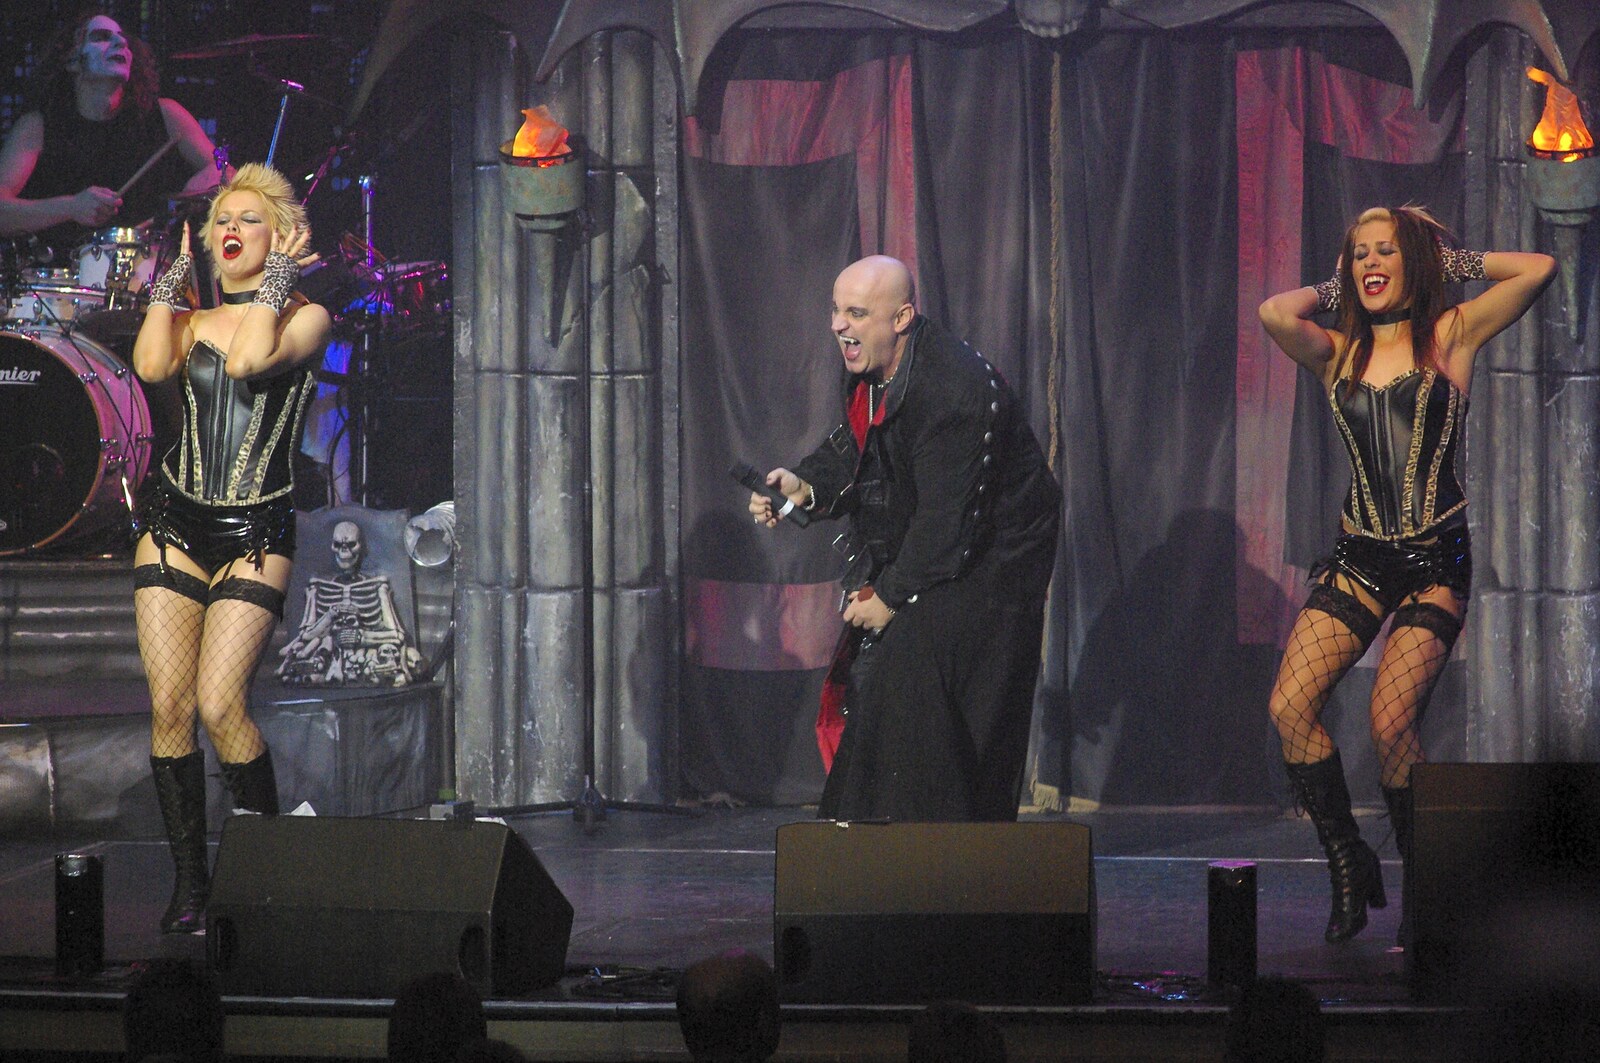 Baron von Rockula makes an appearance from Hell Mary and Vampires Rock, Broadway Theatre, Peterborough - 26th October 2007